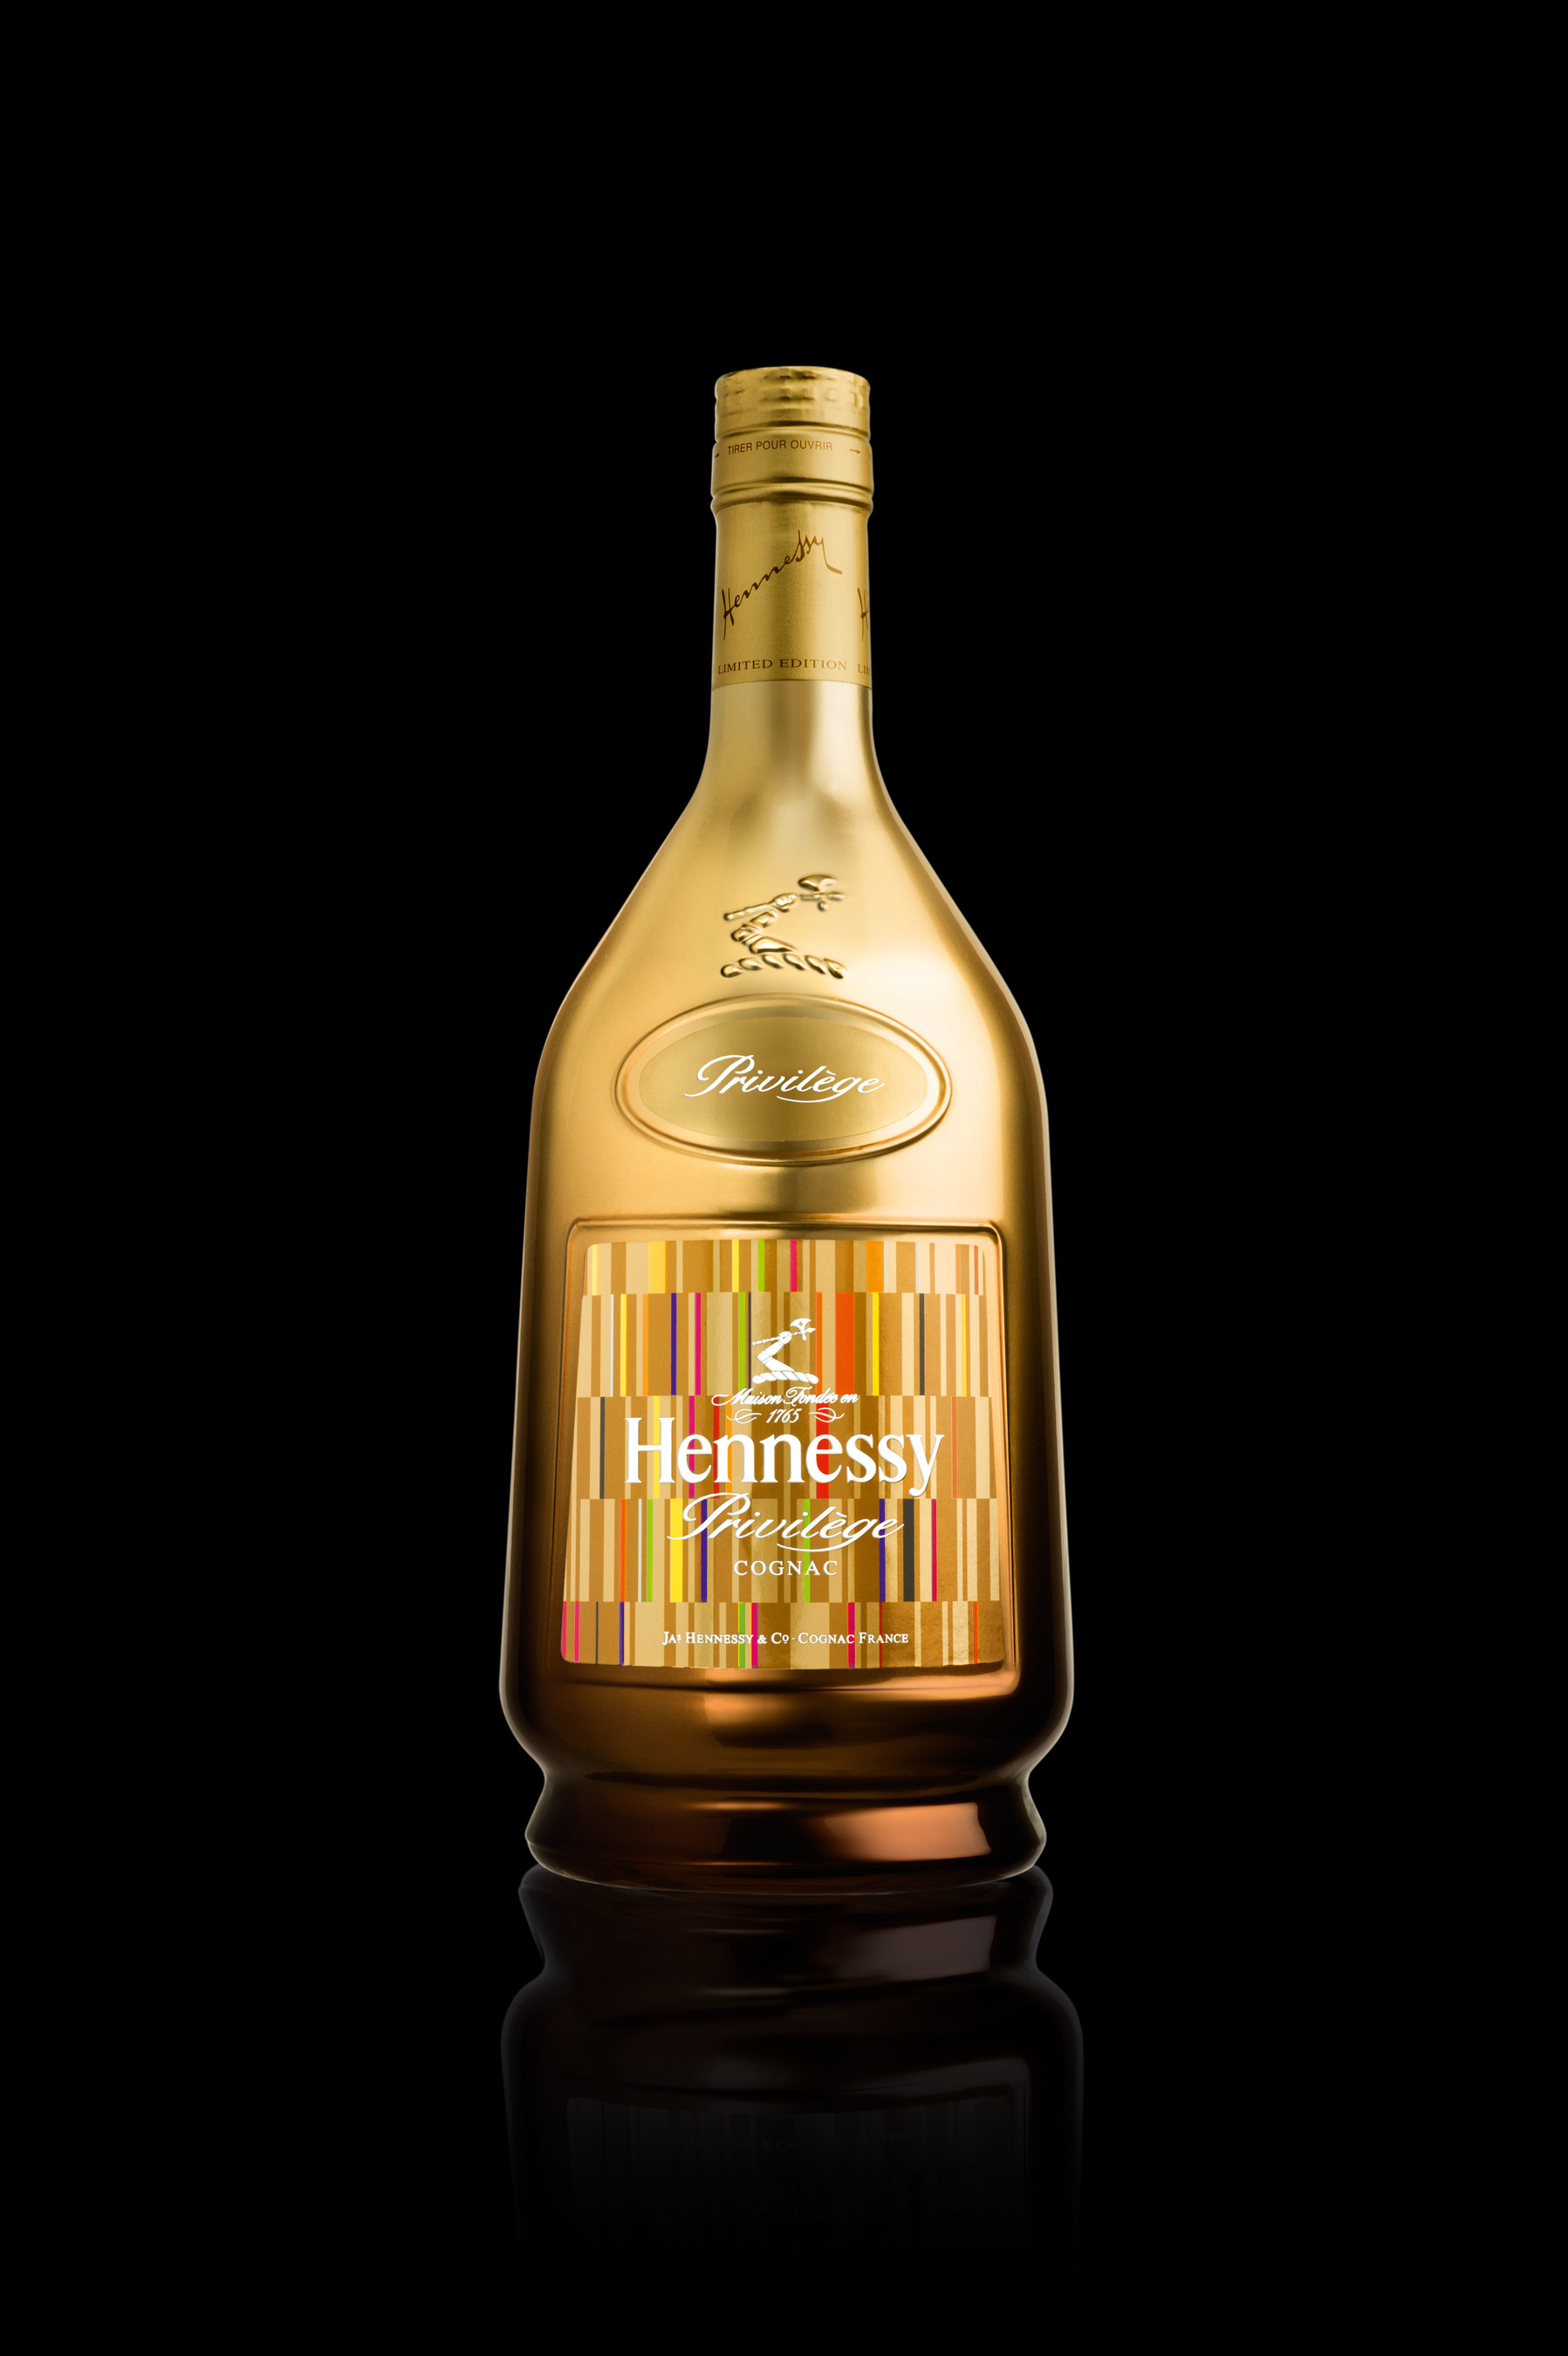 Peter Saville Pays Homage To The DNA Of Hennessy V.S.O.P Privilege Cognac